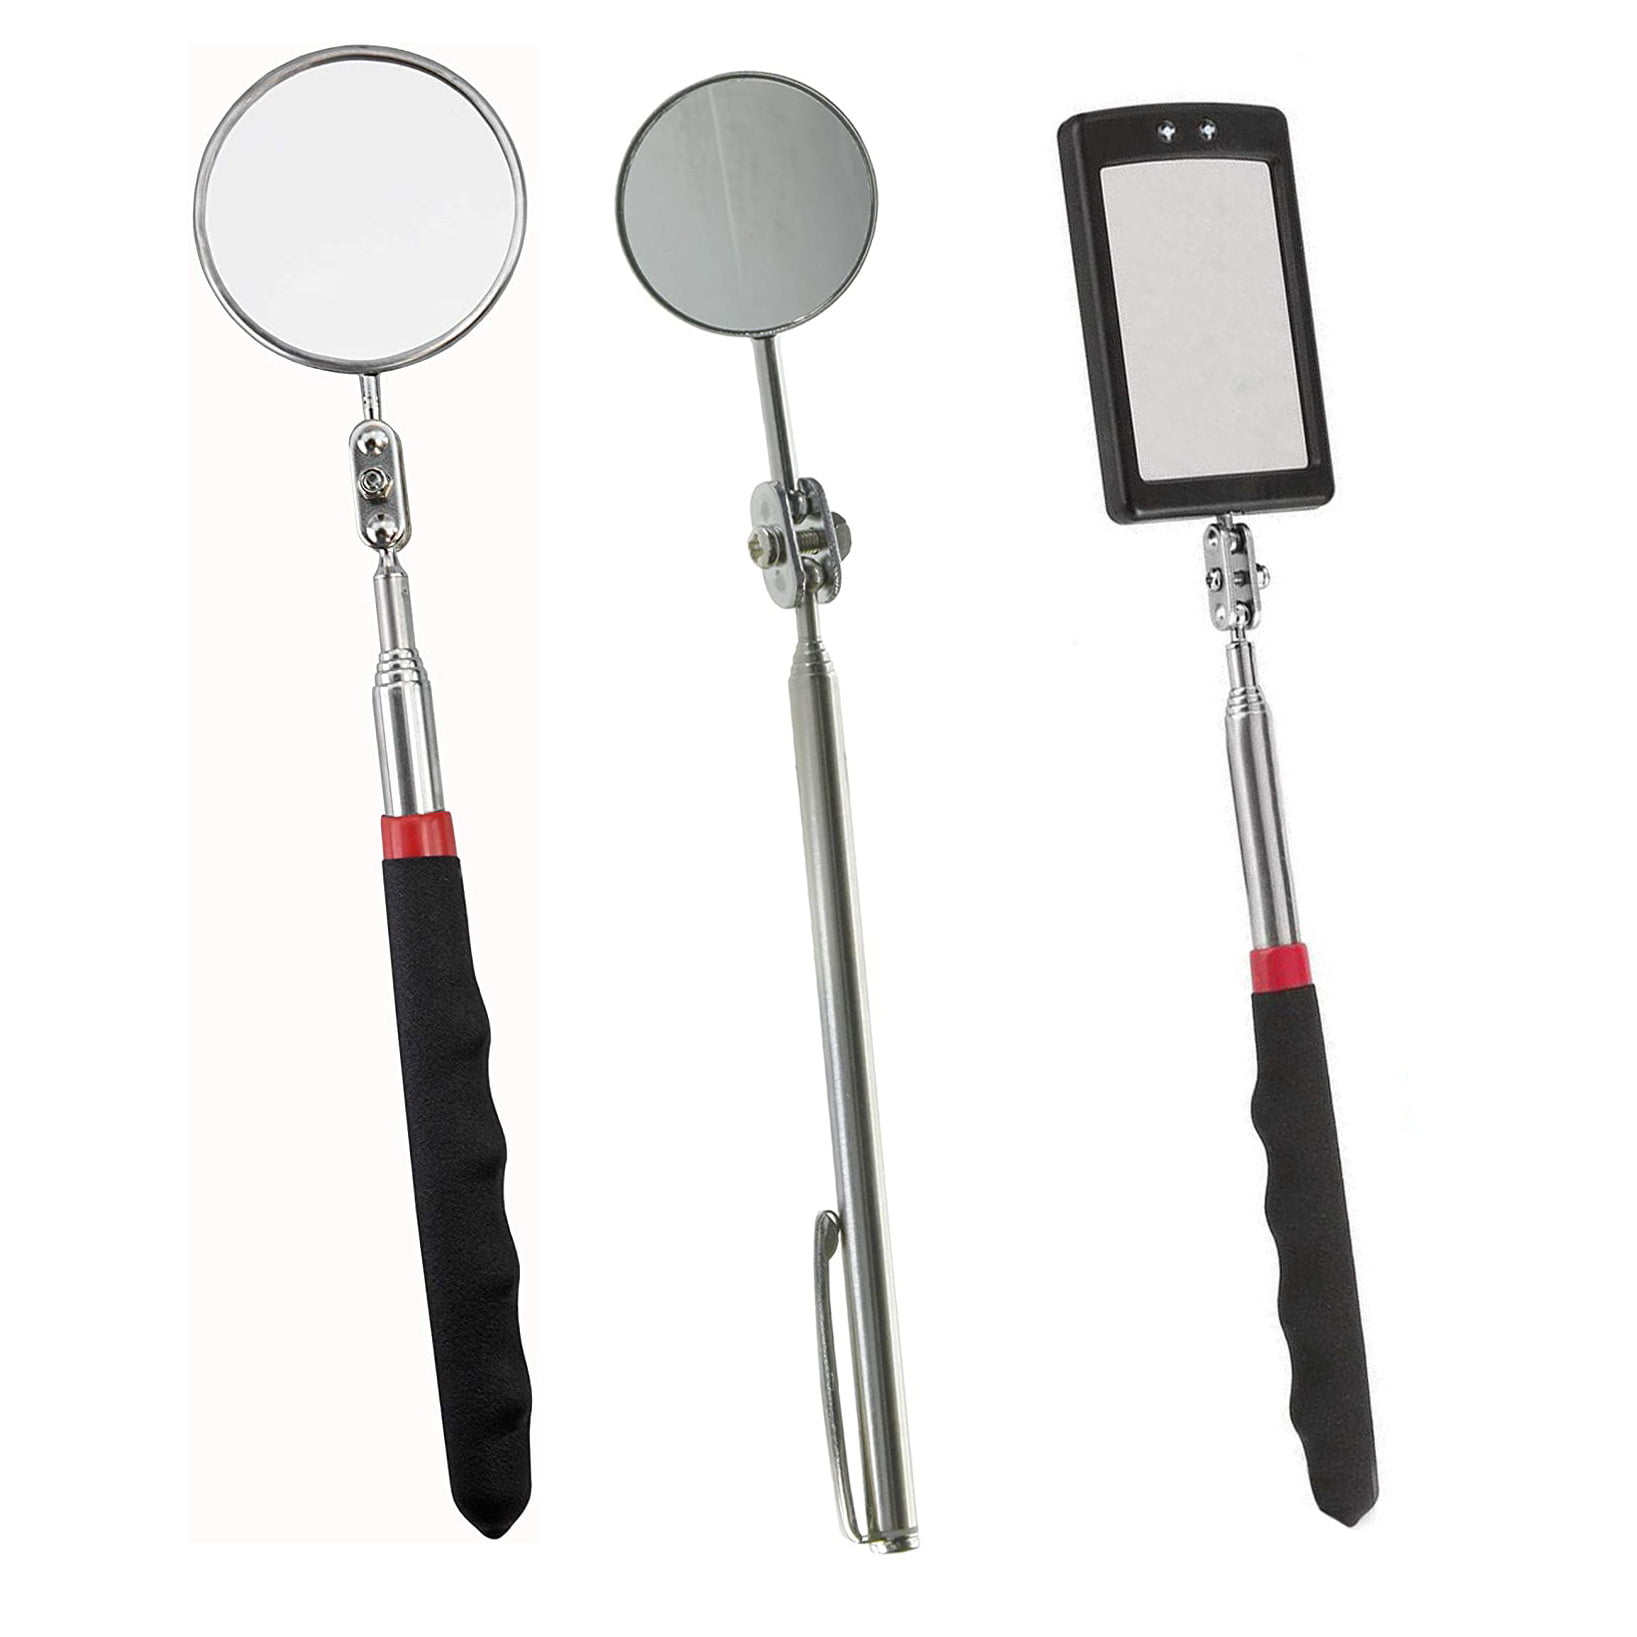 iplusmile 2pcs Telescoping Inspection Mirror 360 Swivel Under Car Inspection Security Mirror Mechanics Mirror on a Stick Hand Tool for Automotive Home Inspector 